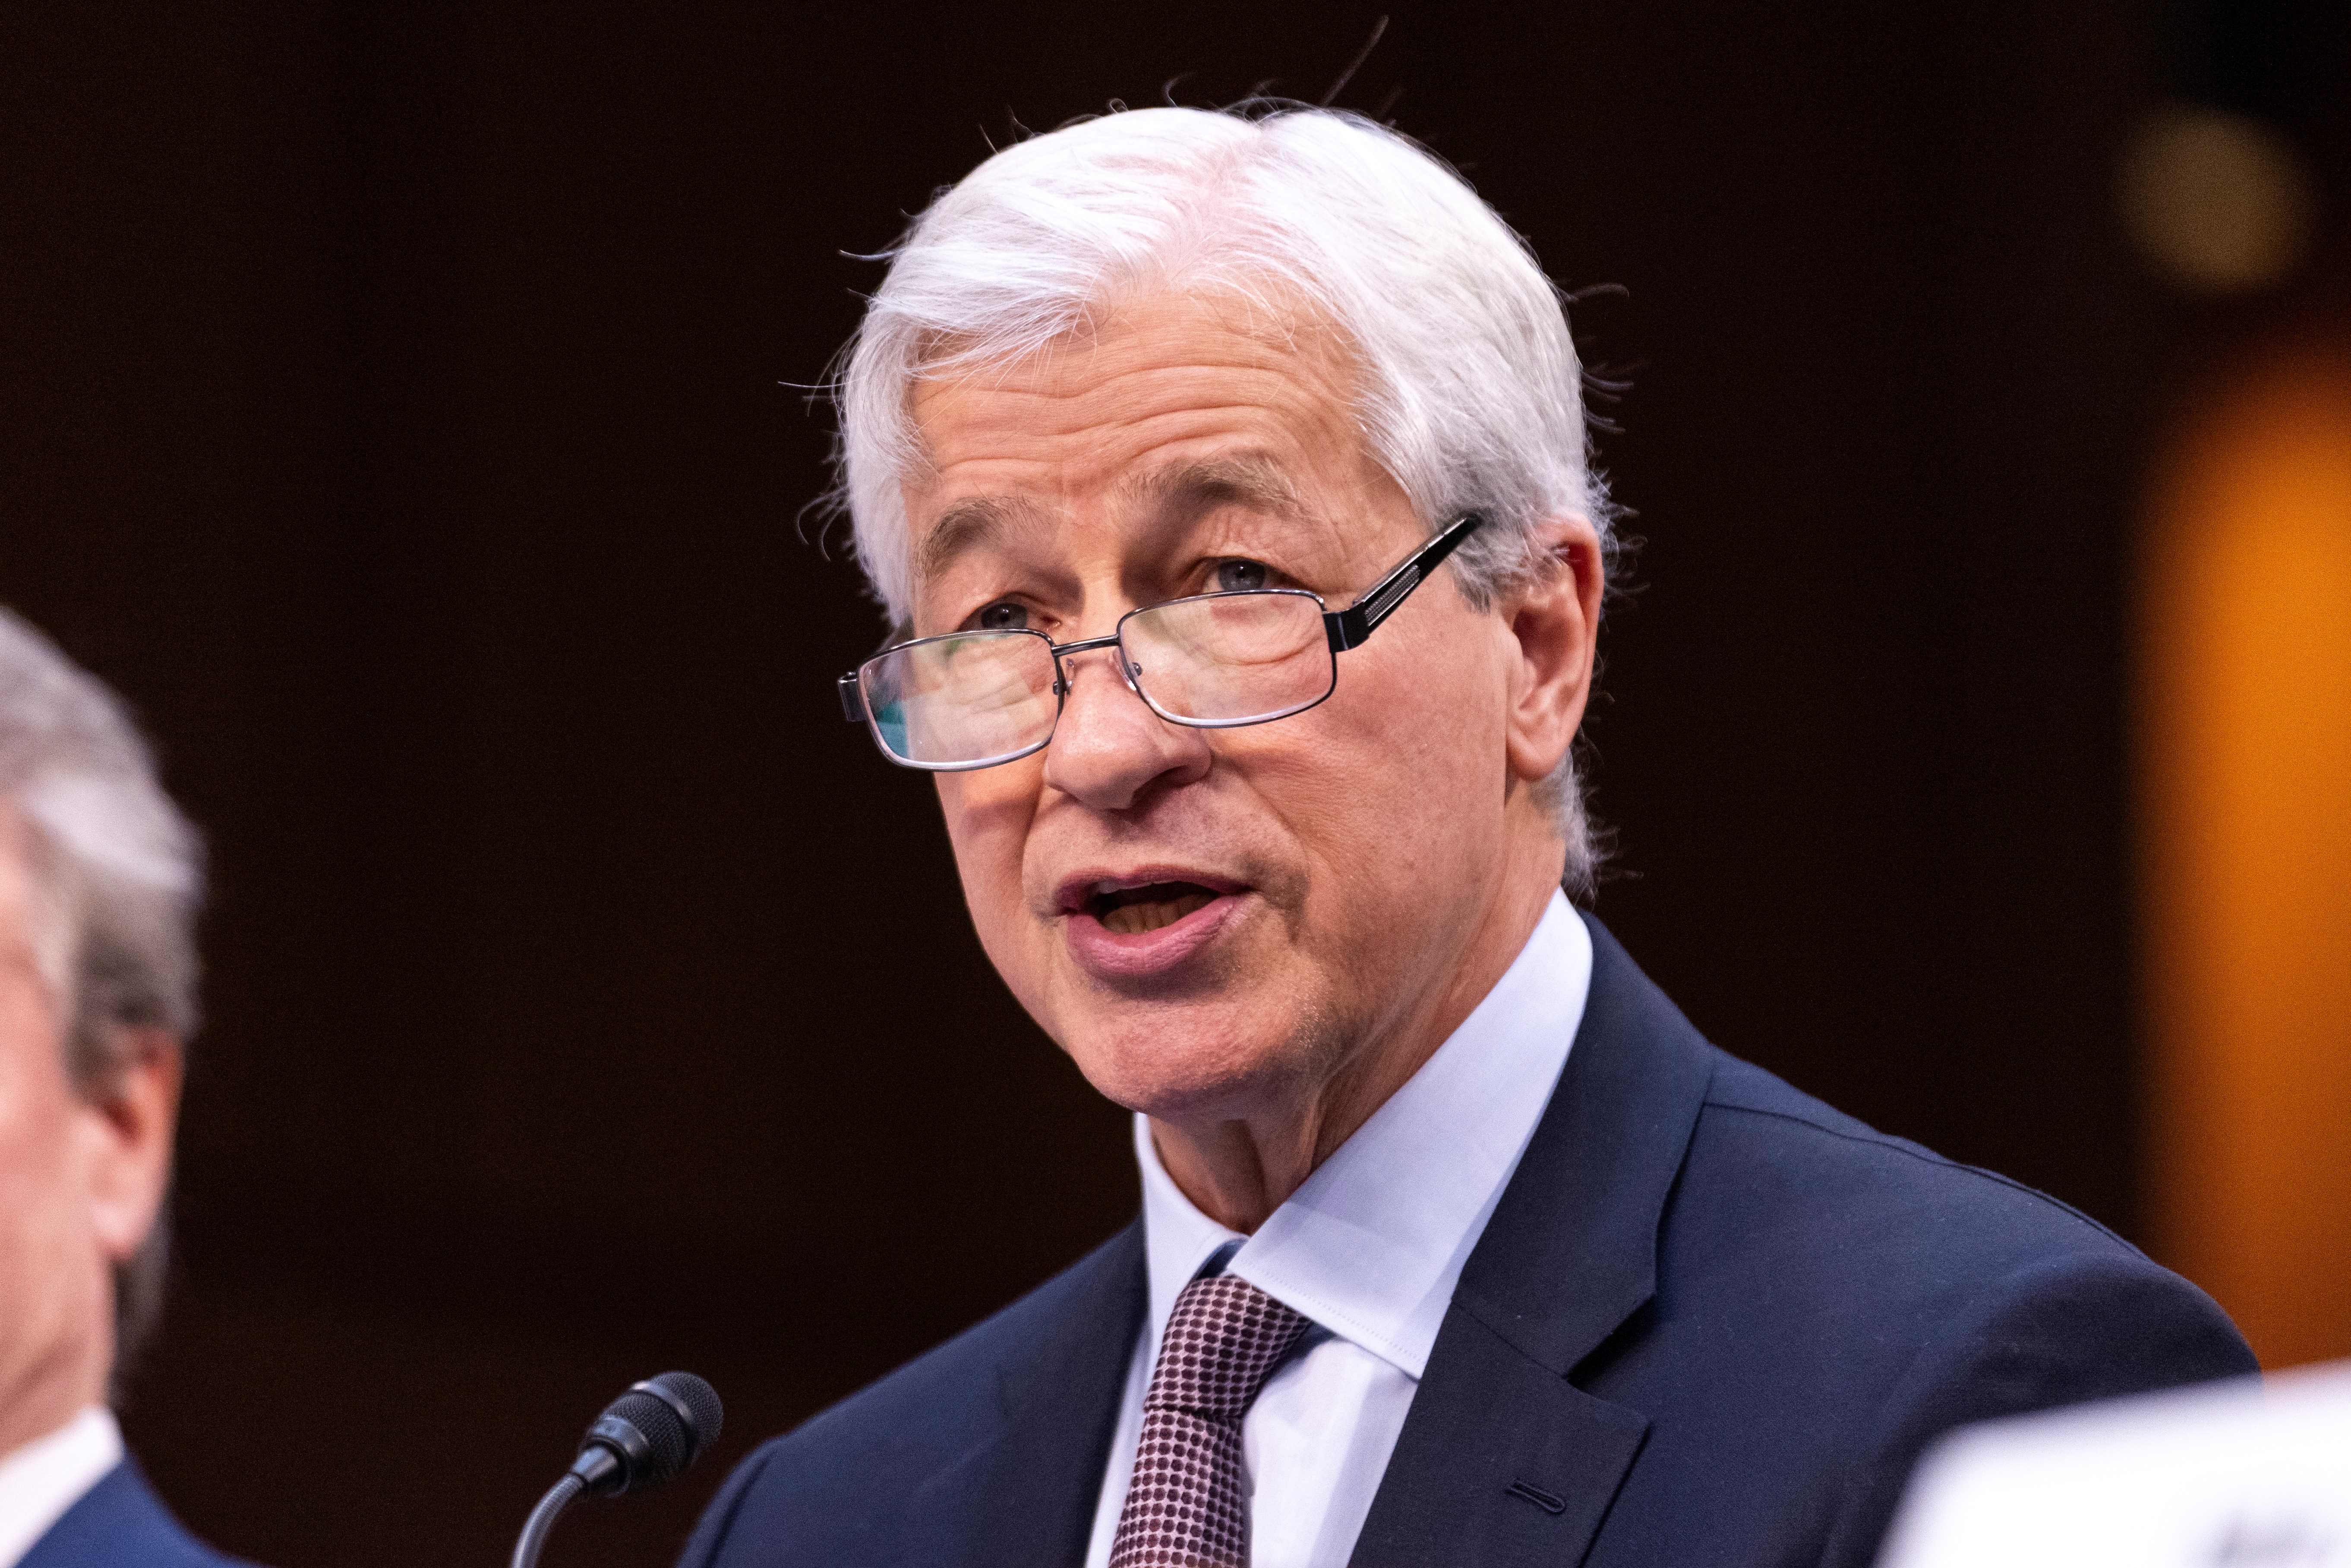 Jamie Dimon says the end to his time as JPMorgan CEO is ‘not 5 years anymore’